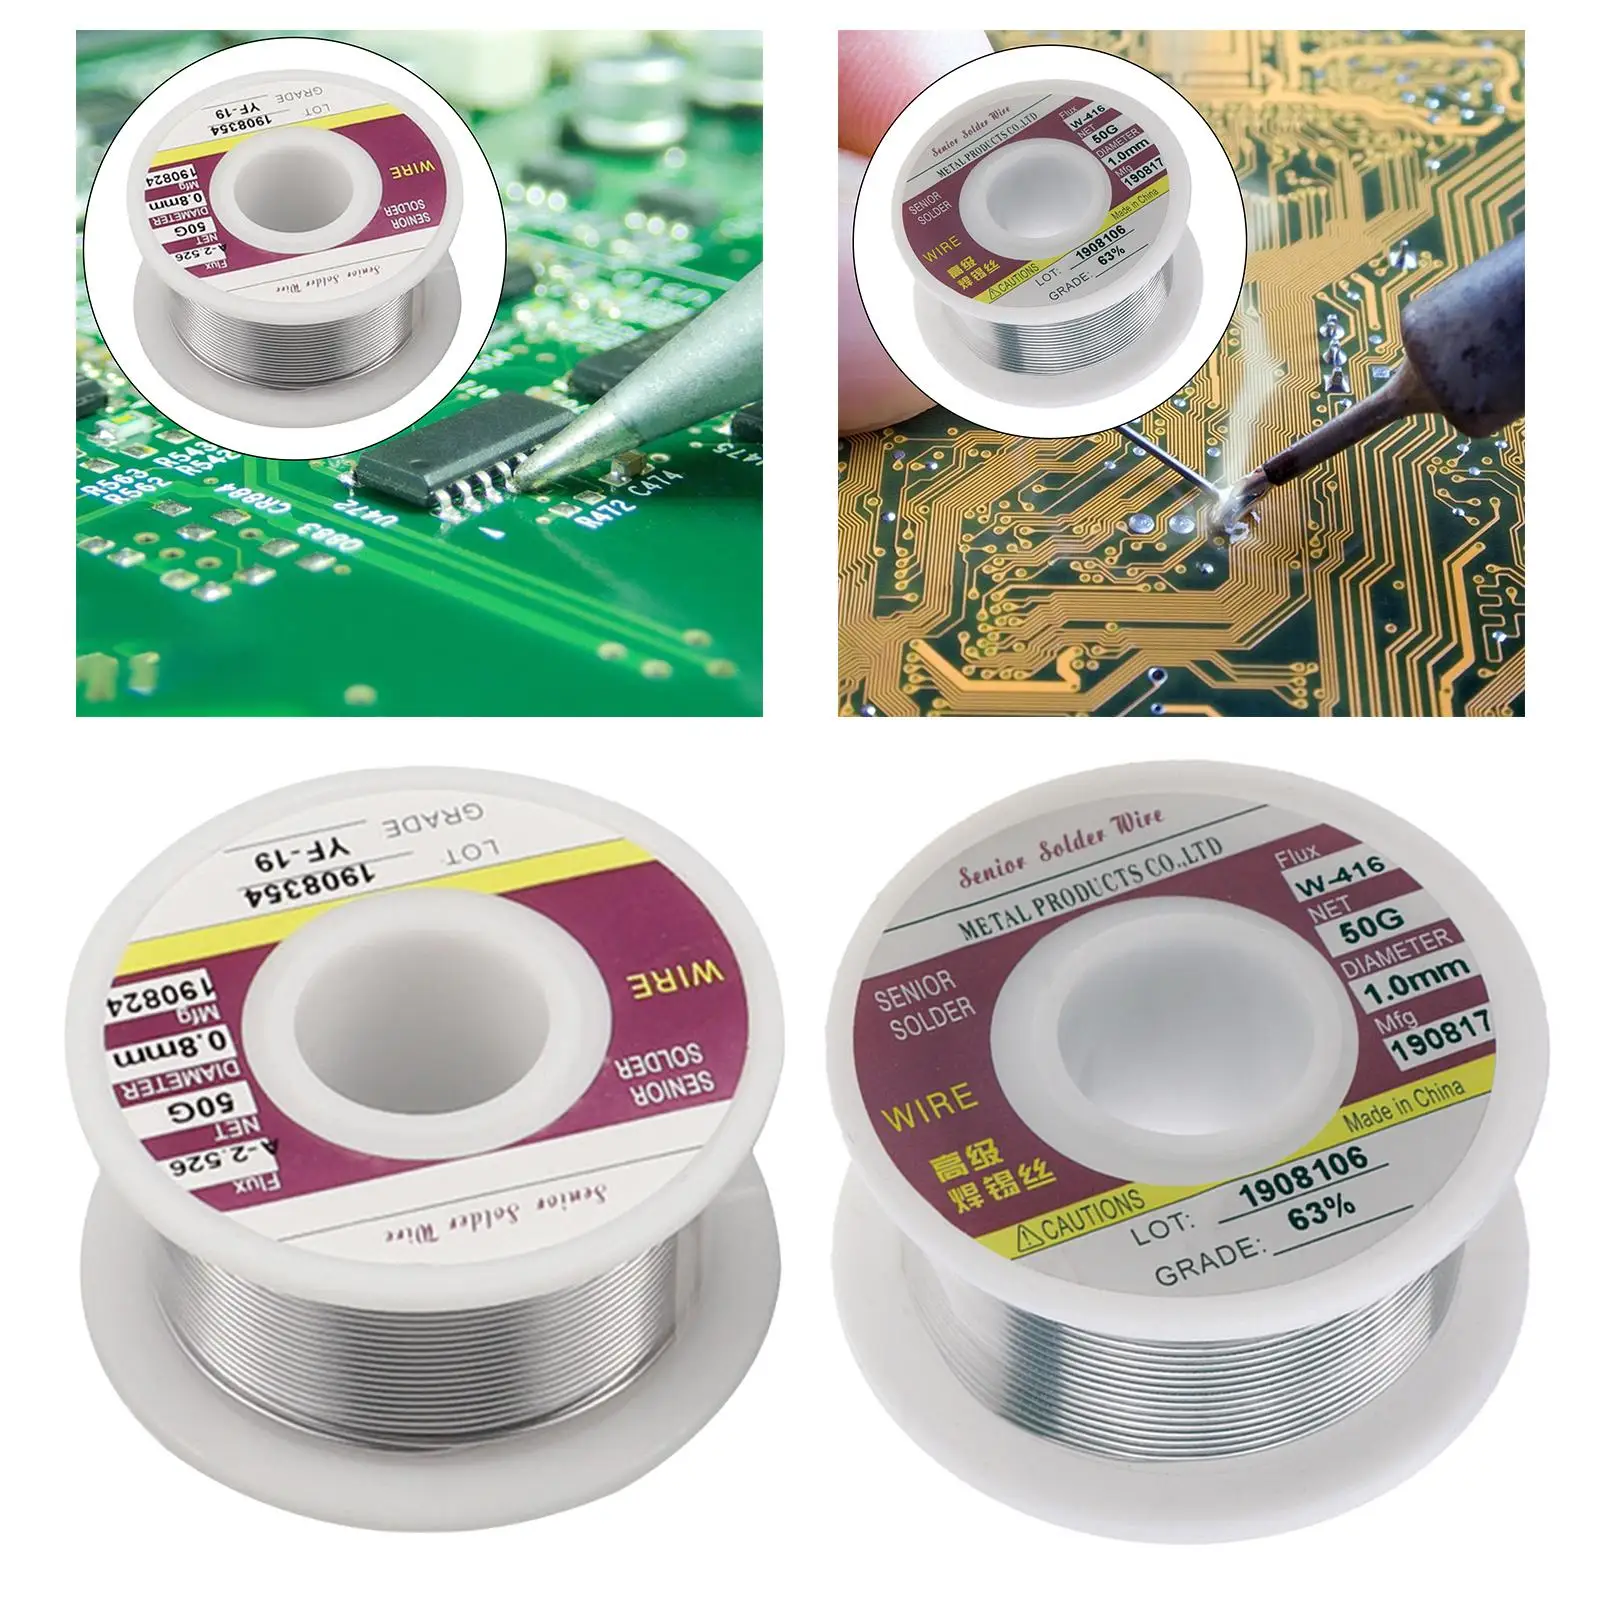 Core Wire Easy to Use Repairing Tools Portable Multifunctional Solder Tin Wire for Computers Repair Electronics Components